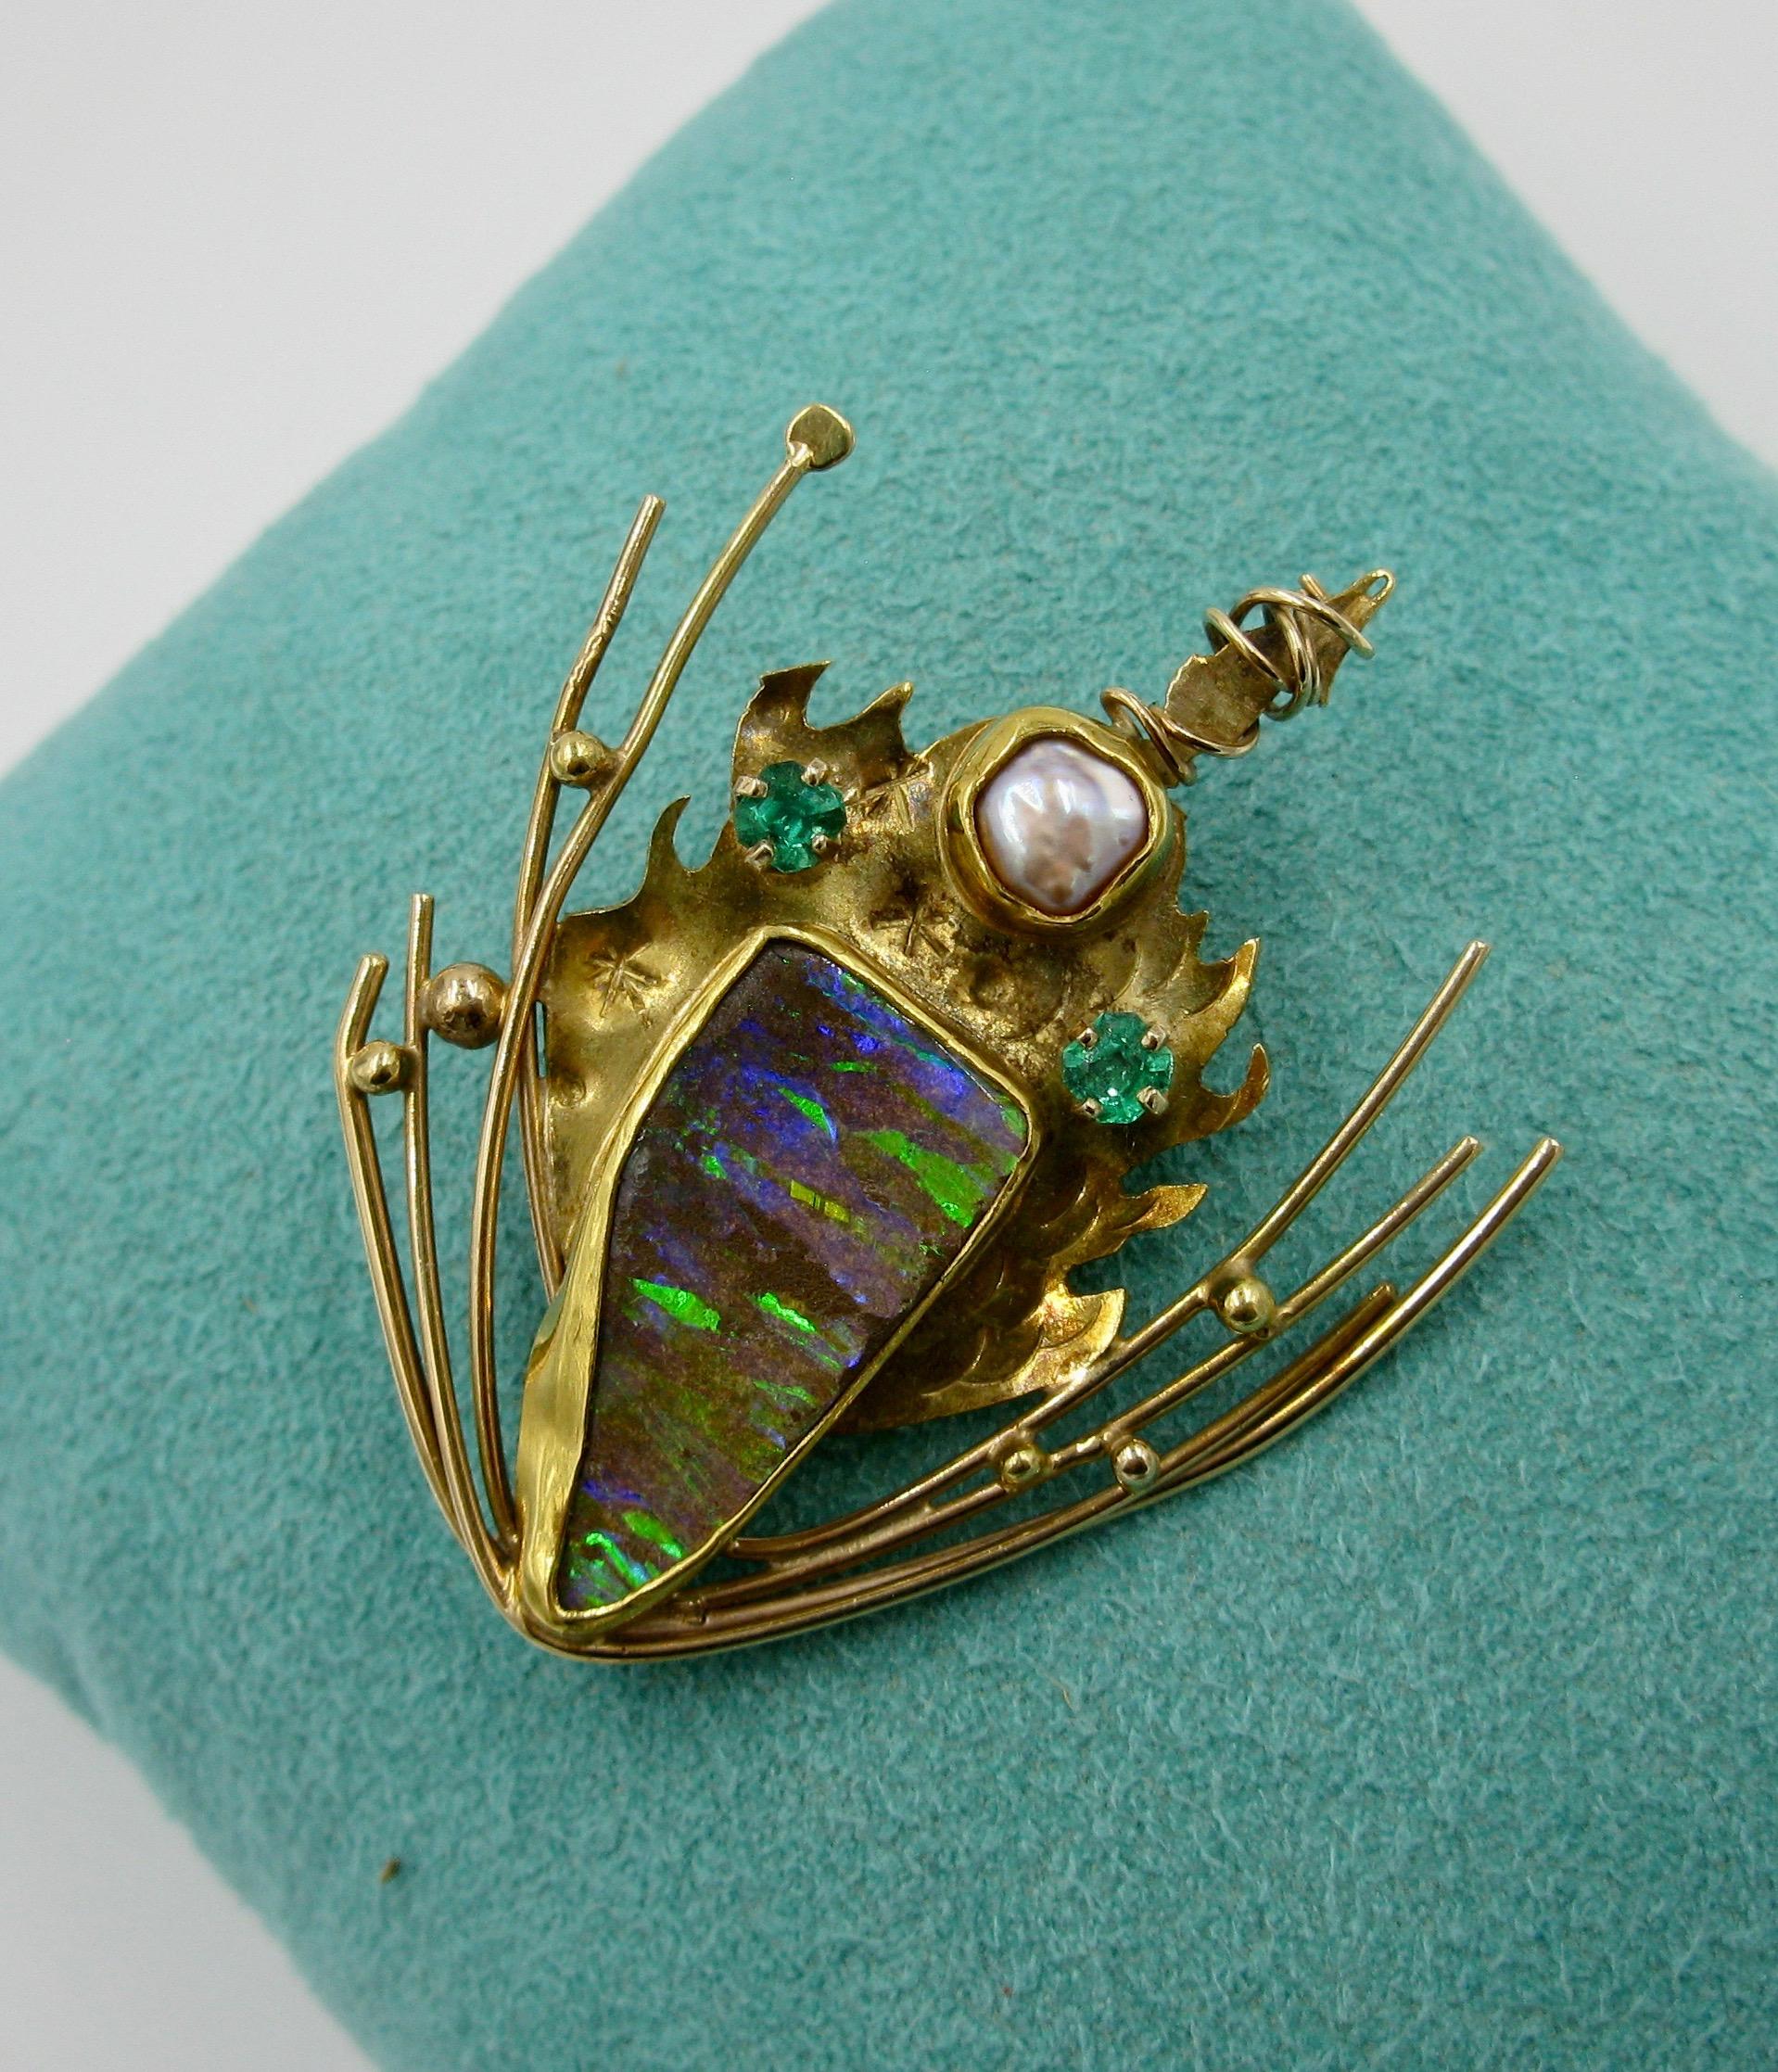 A spectacular Mid-Century Modern Opal Emerald Pearl Brooch by Daniel Spirer of Massachusetts in 22, 18 and 14 Karat Gold, titled 